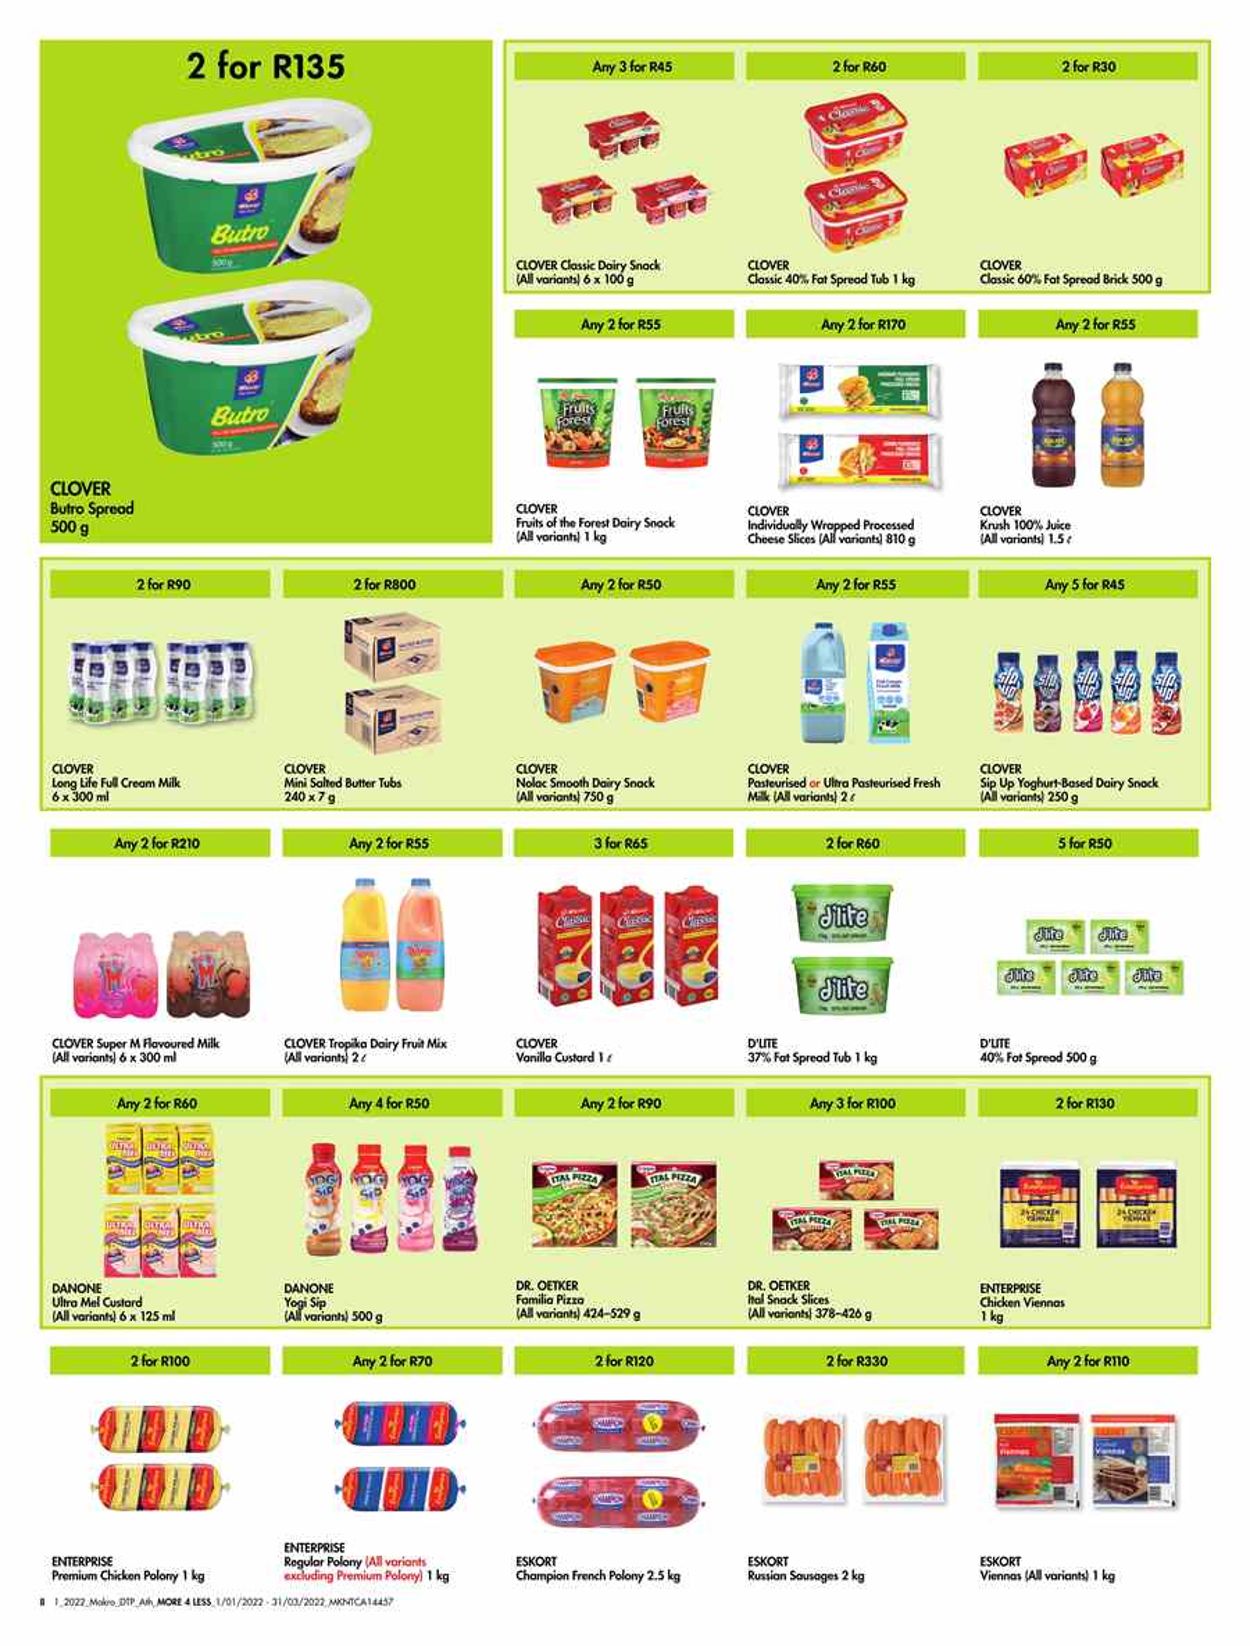 Makro Catalogue from 2022/01/01